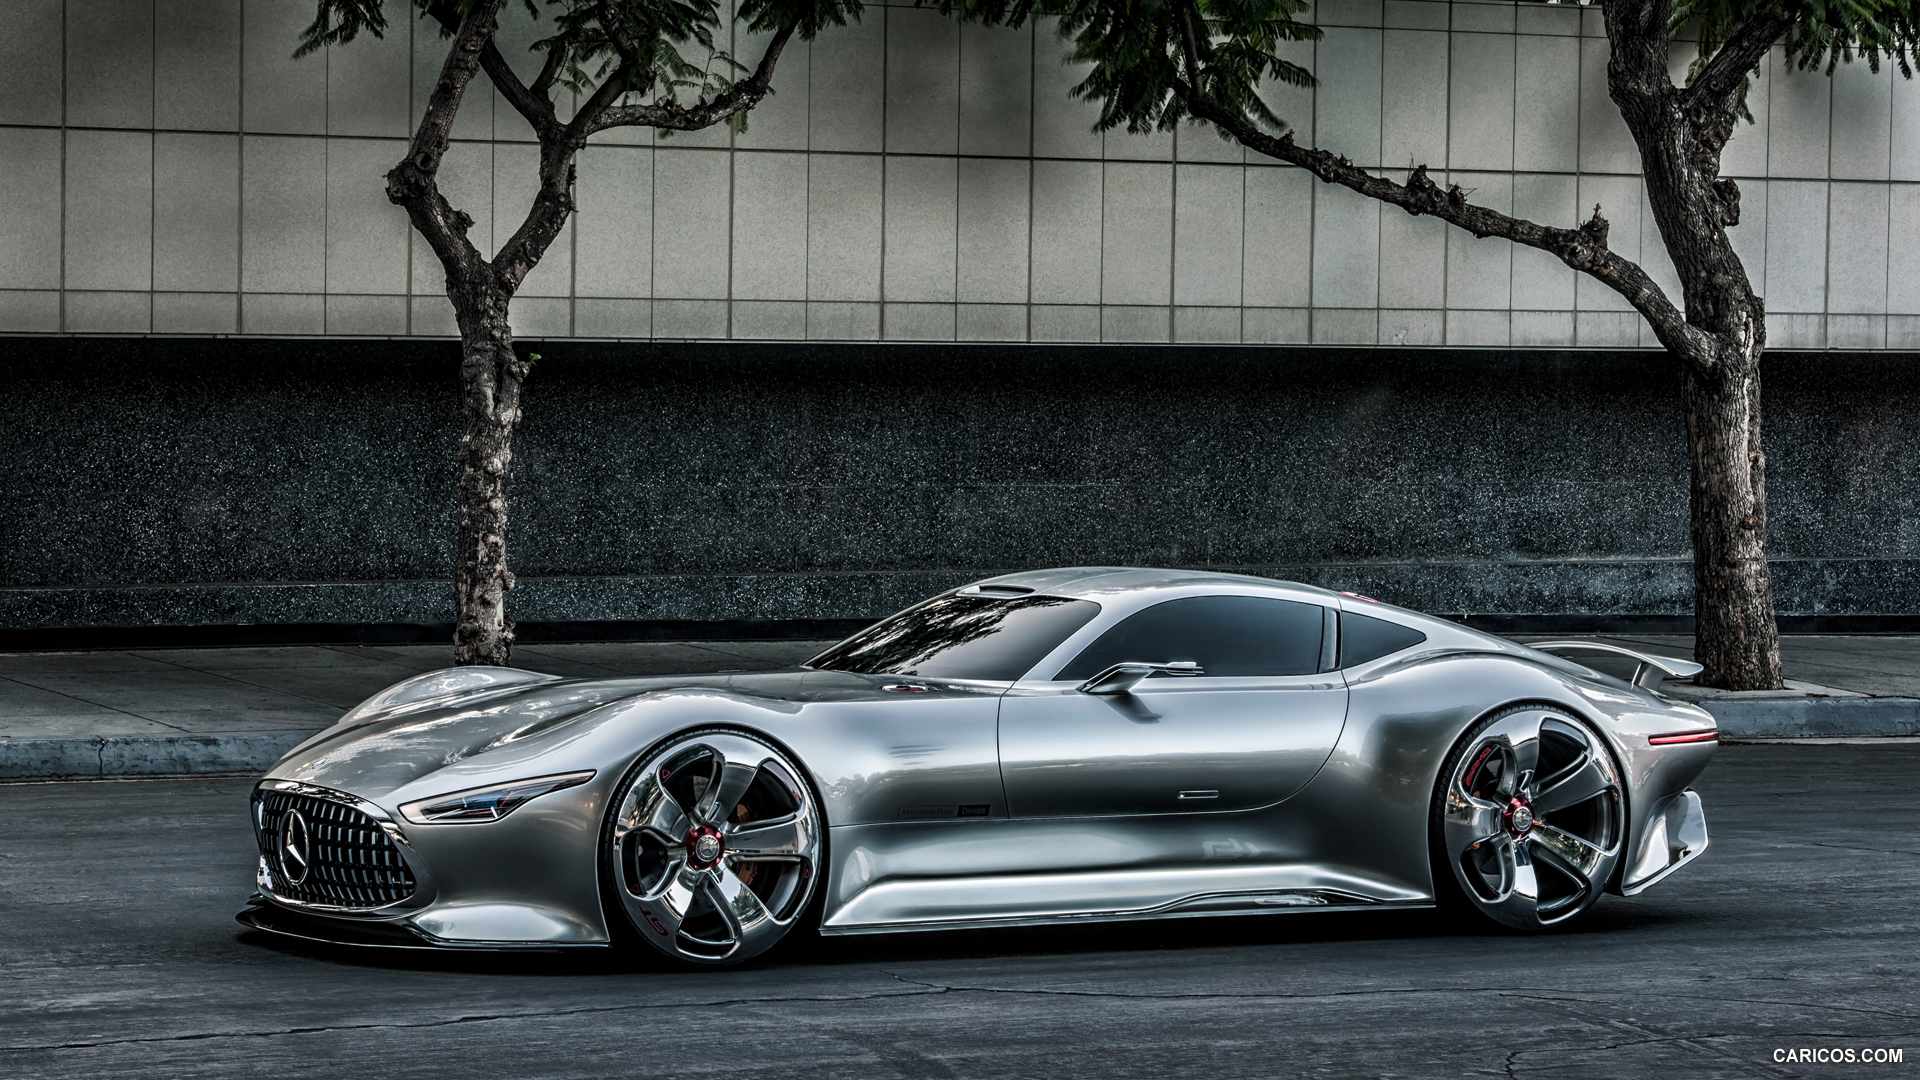 Mercedes-Benz AMG Vision Gran Turismo Concept (2013)  - Side, #2 of 25